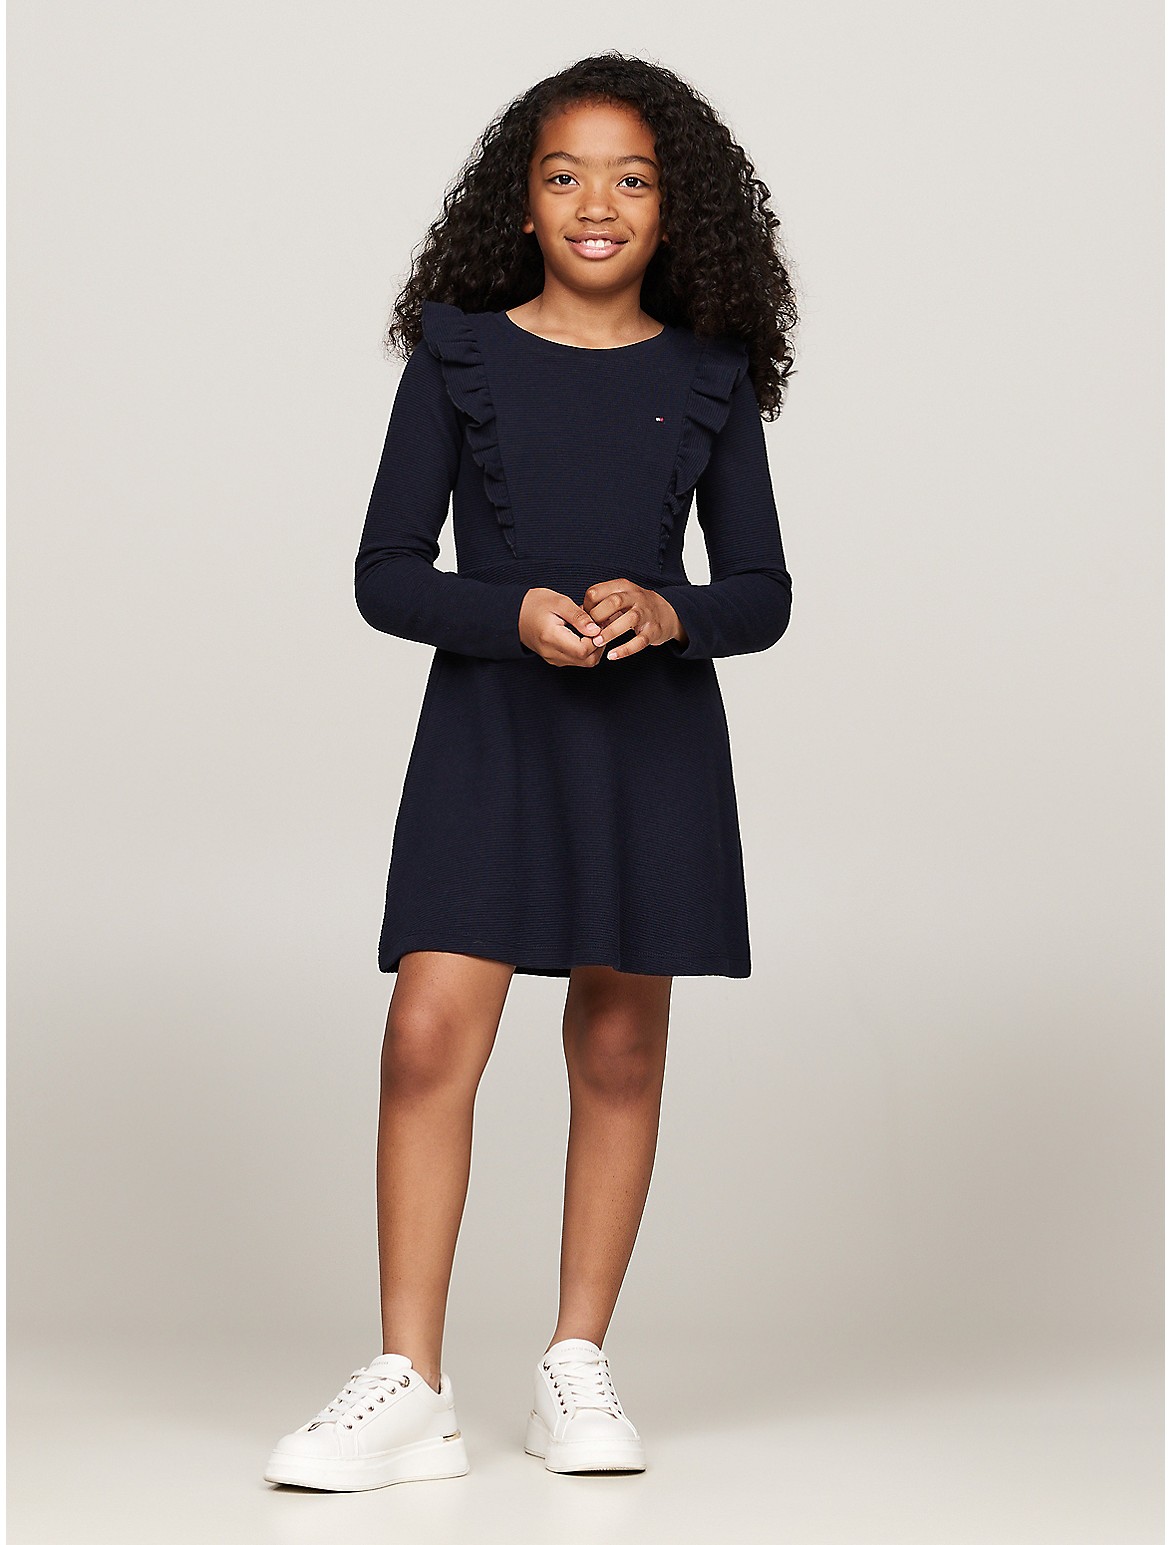 Tommy Hilfiger Girls' Kids' Fit and Flare Solid Ruffle Dress